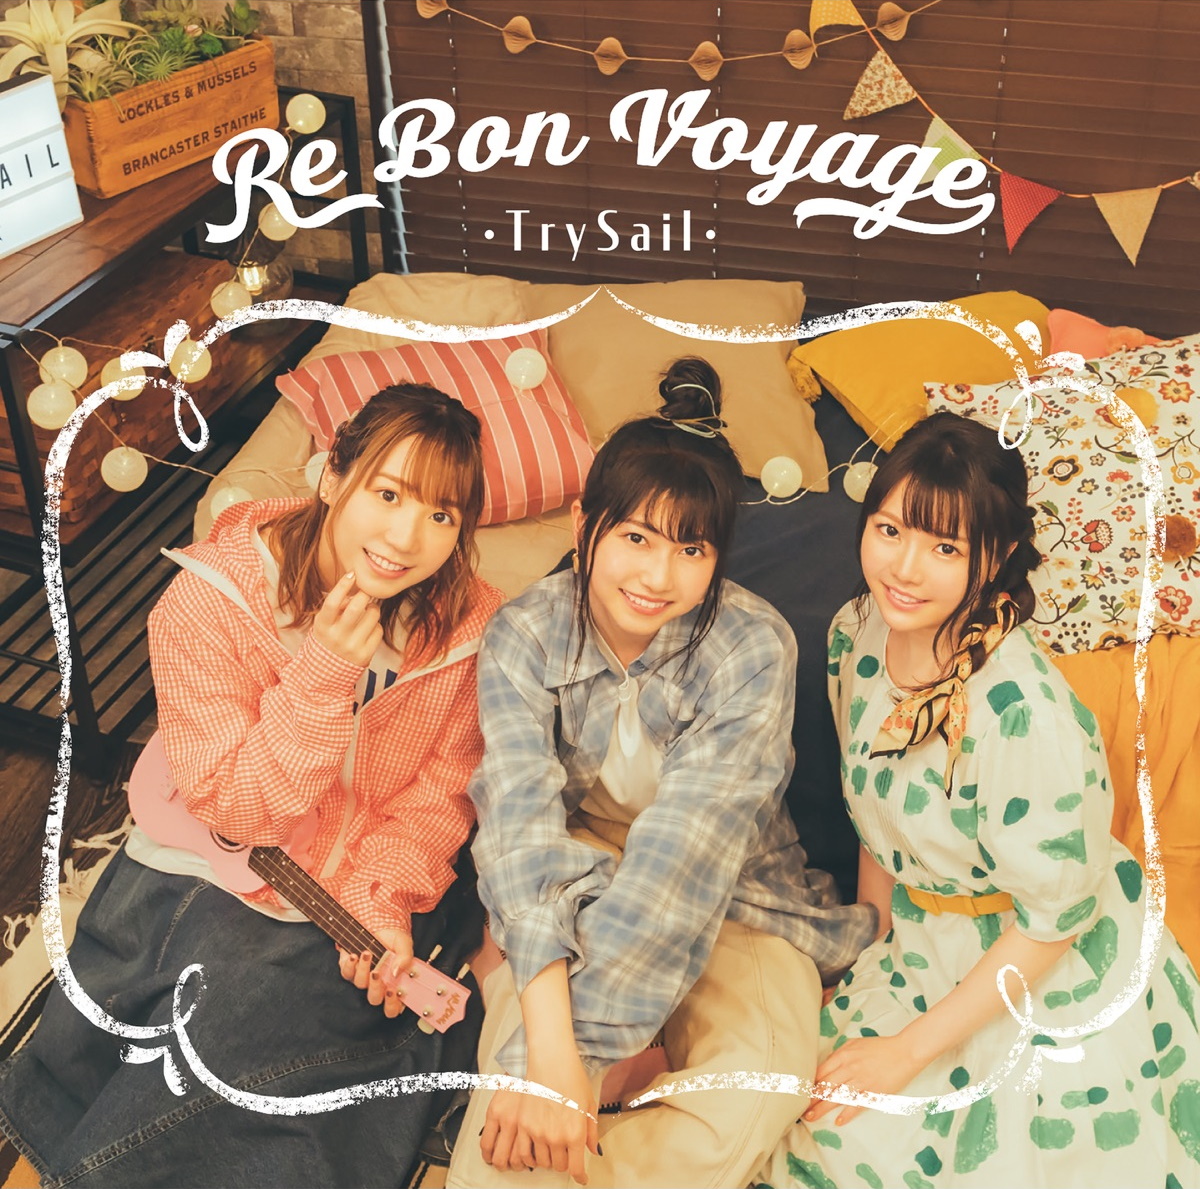 Cover art for『TrySail - Re Bon Voyage』from the release『Re Bon Voyage』